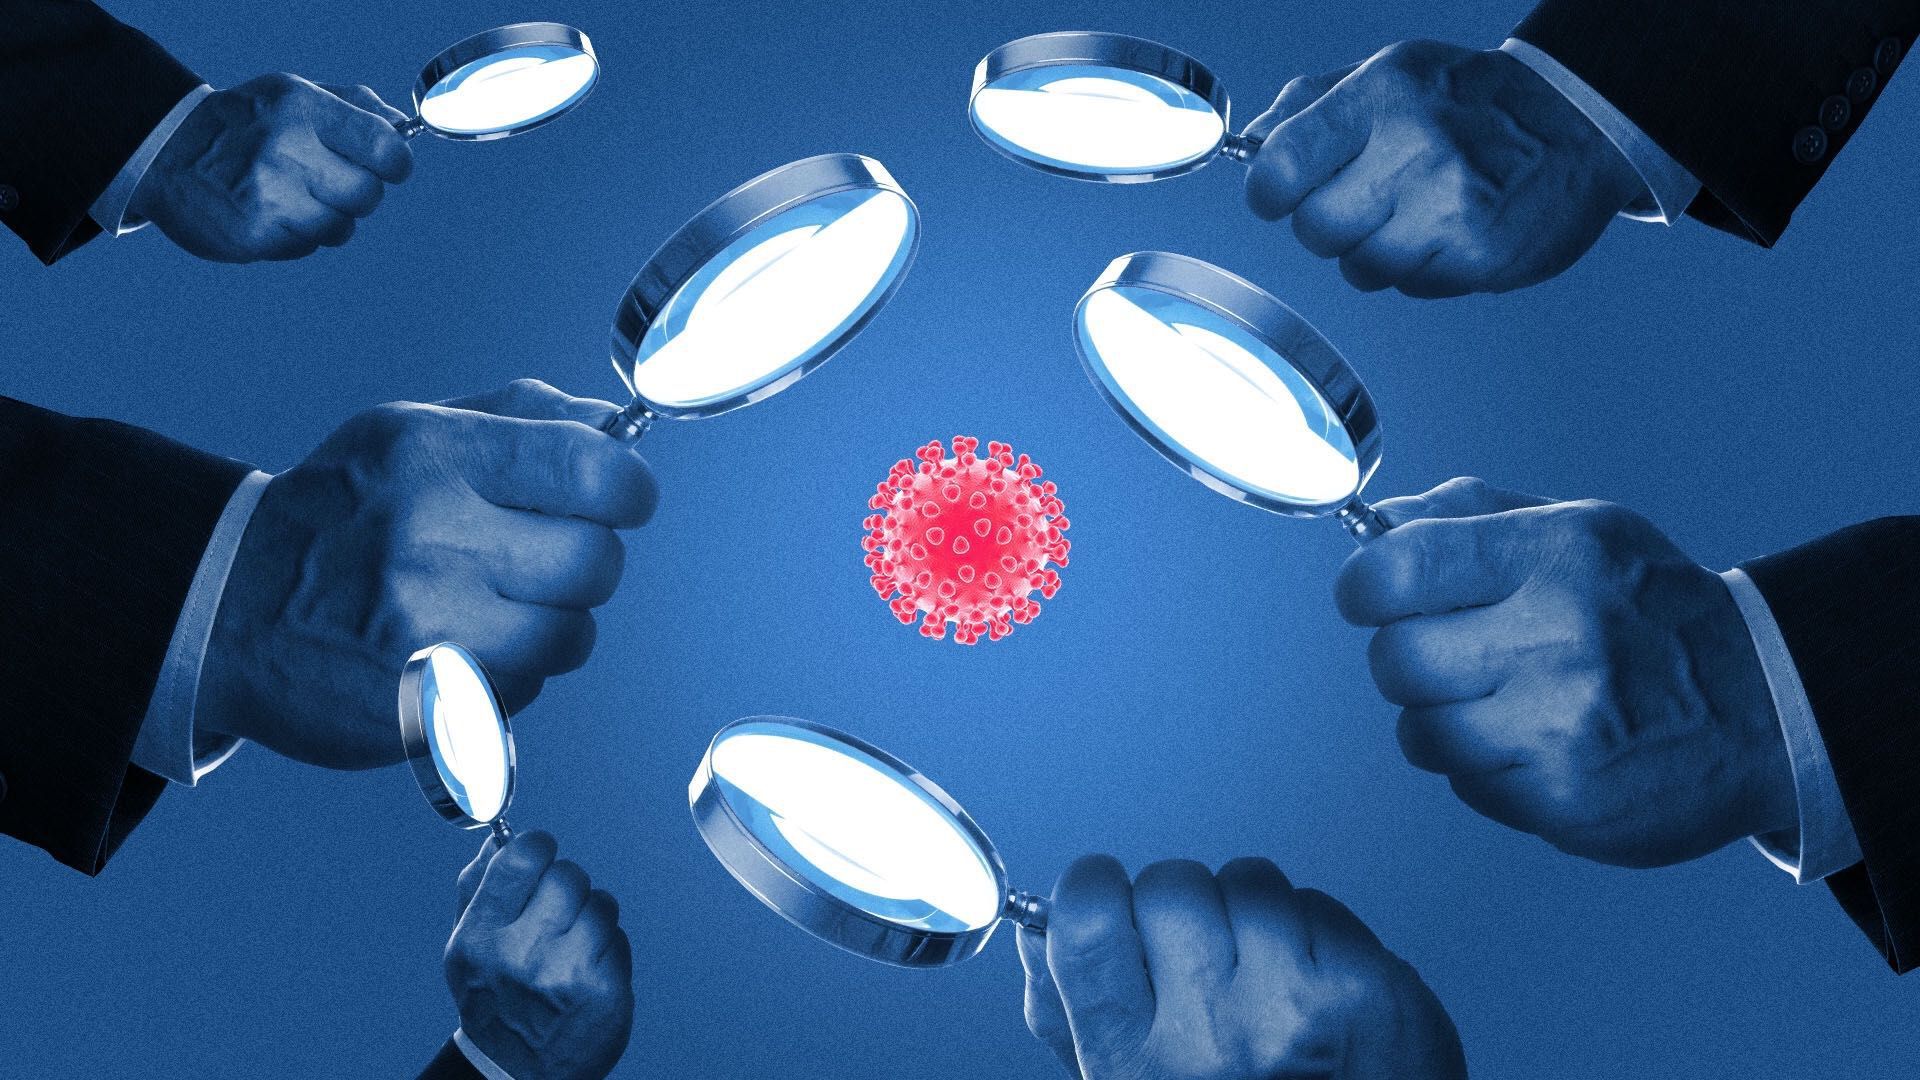 Illustration of a coronavirus cell surrounded by hands holding magnifying glasses